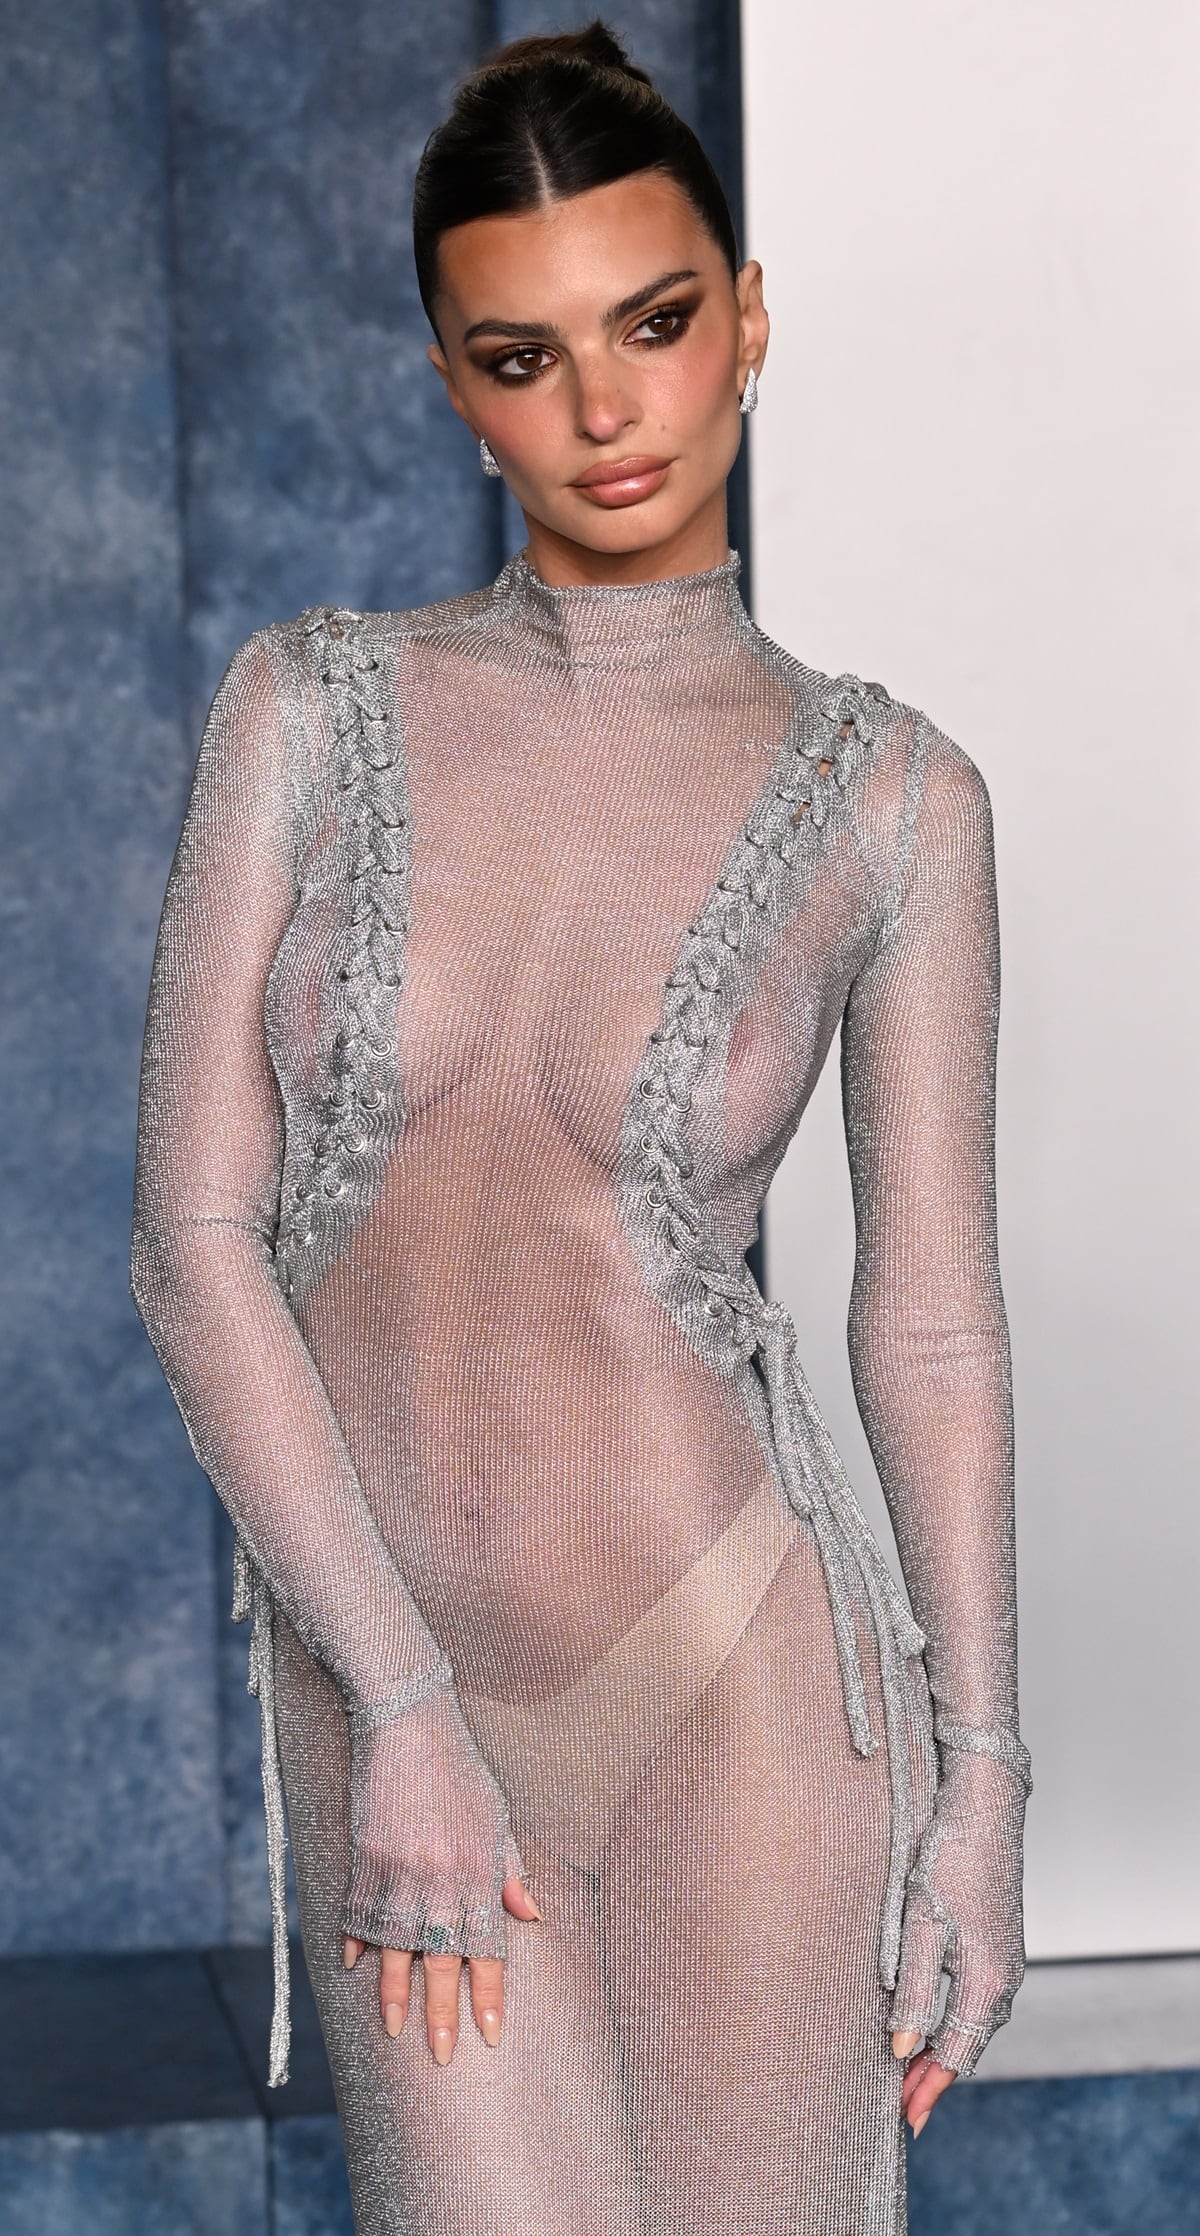 Emily Ratajkowski made heads turn in a completely sheer gown at the 2023 Vanity Fair Oscar Party